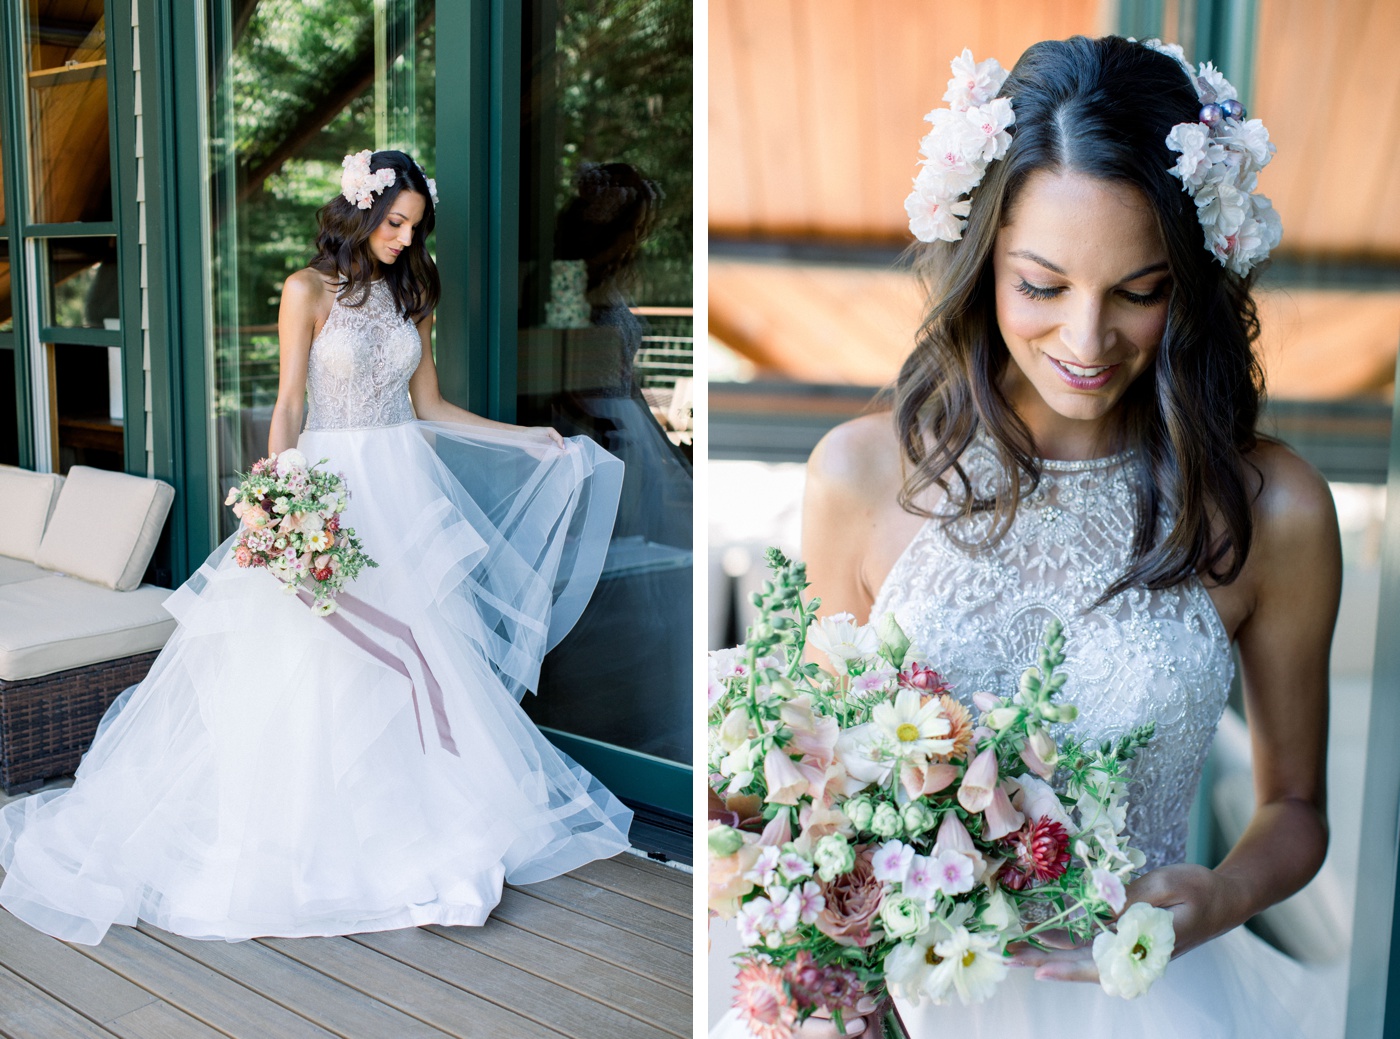 Bride portraits at Lakefalls Lodge in New Hampshire